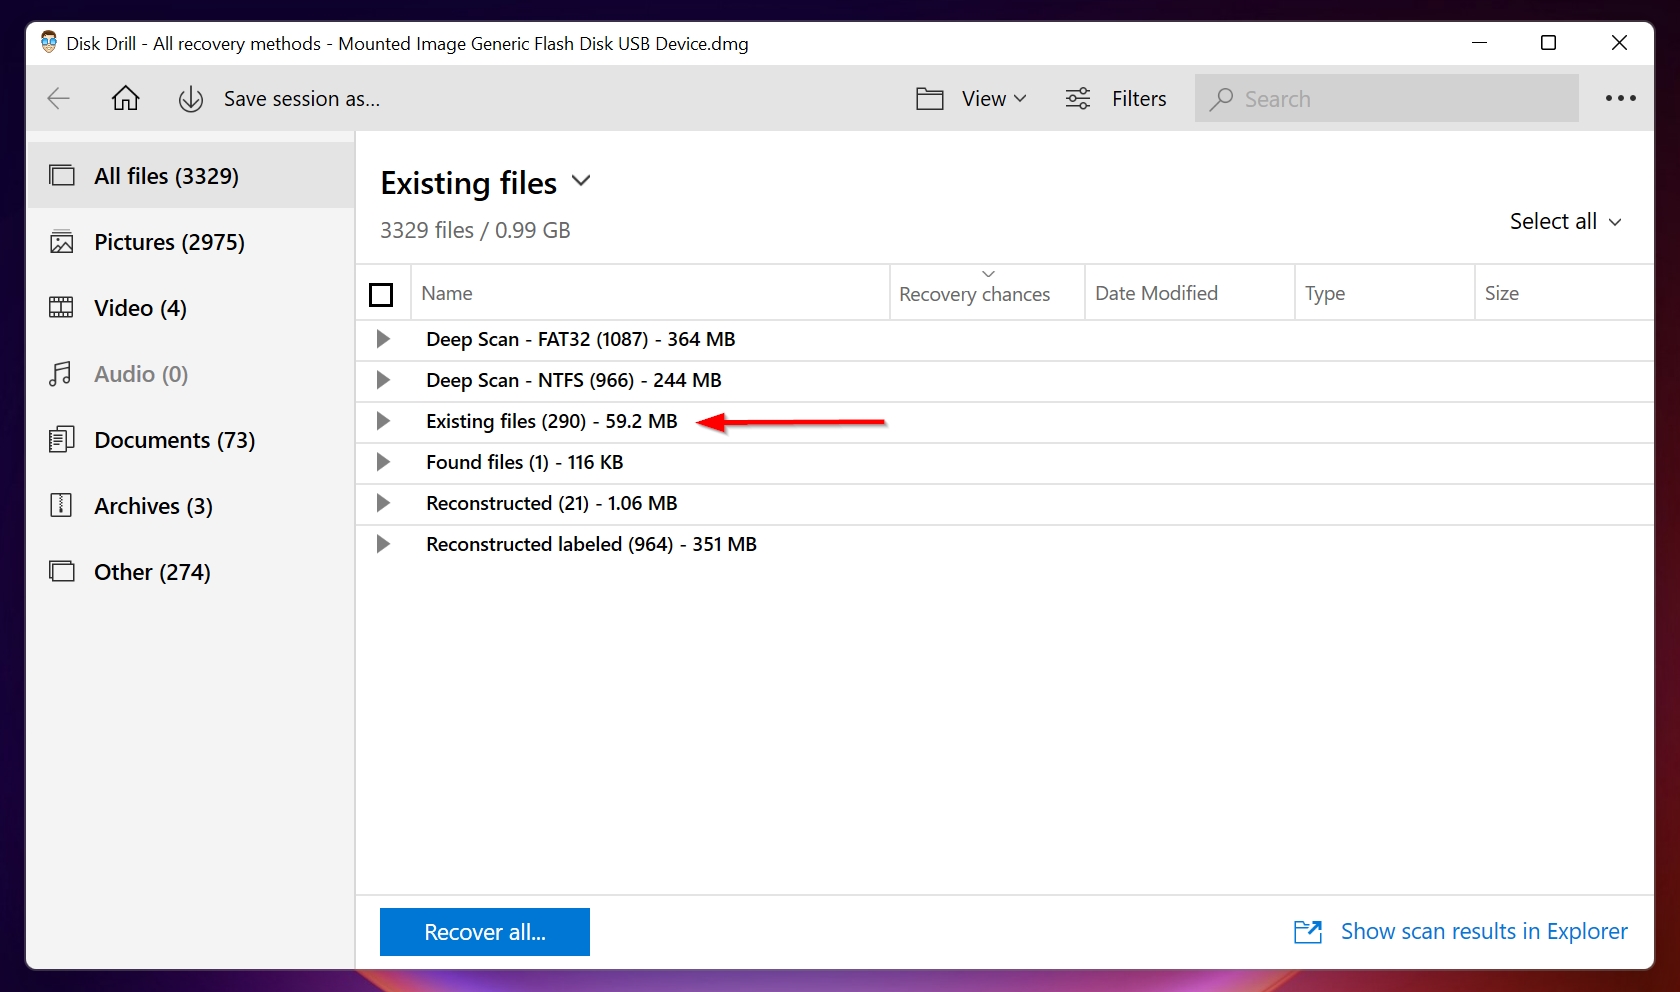 Existing files option in Disk Drill.